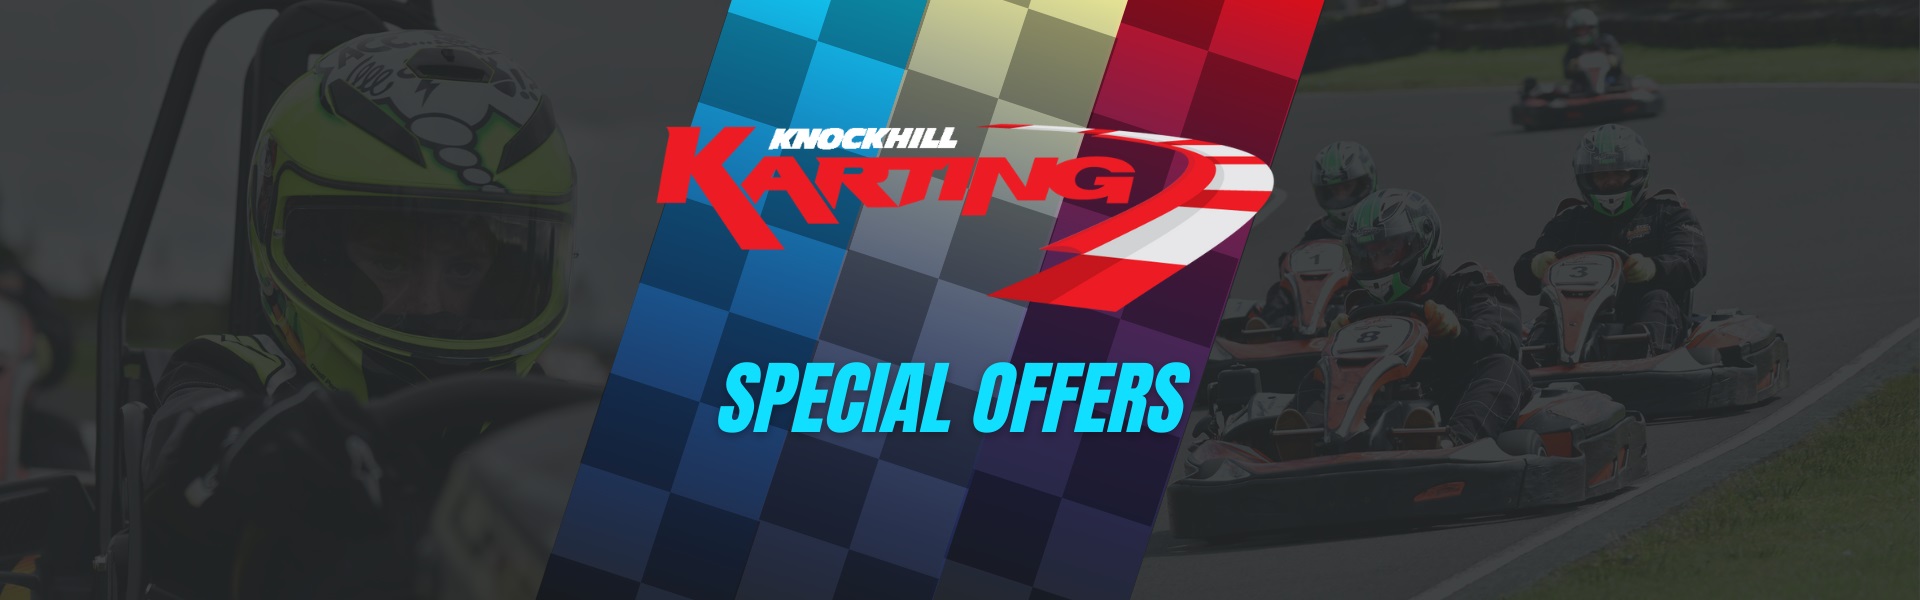 January Karting Special Offers